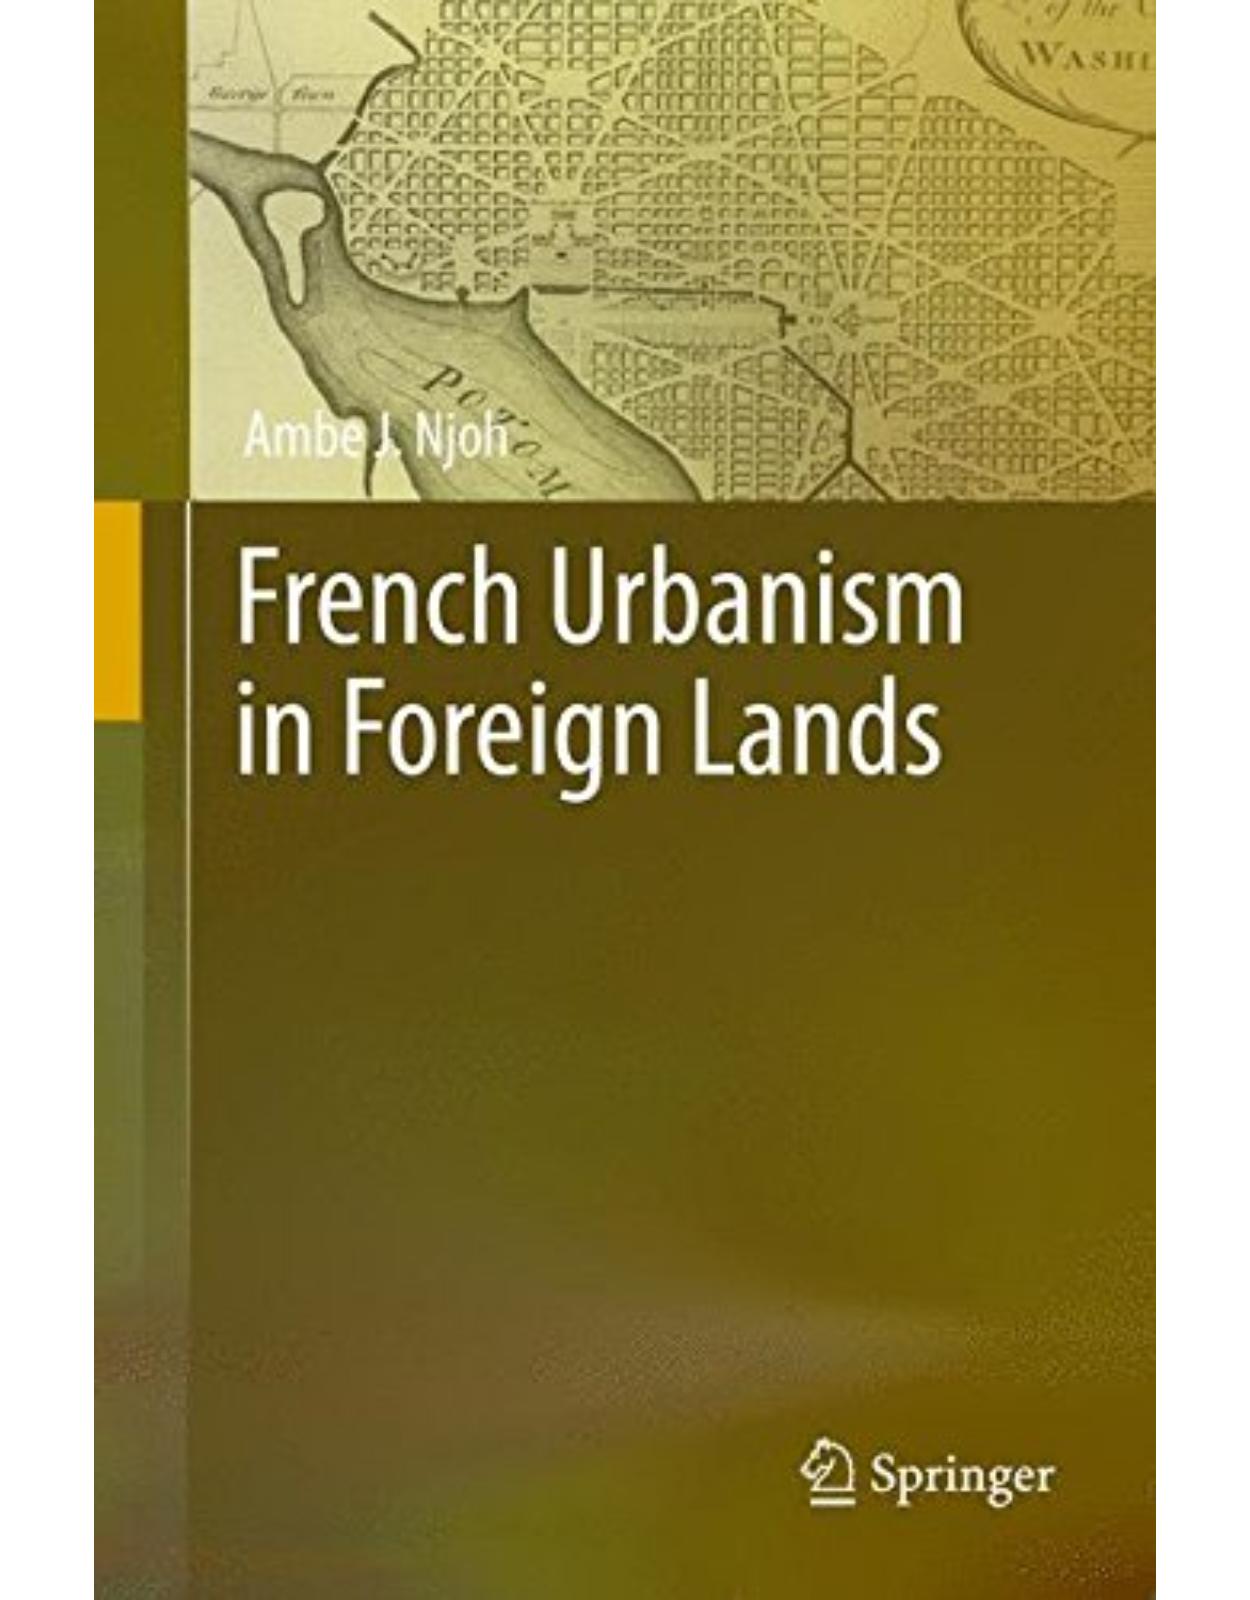 French Urbanism in Foreign Lands